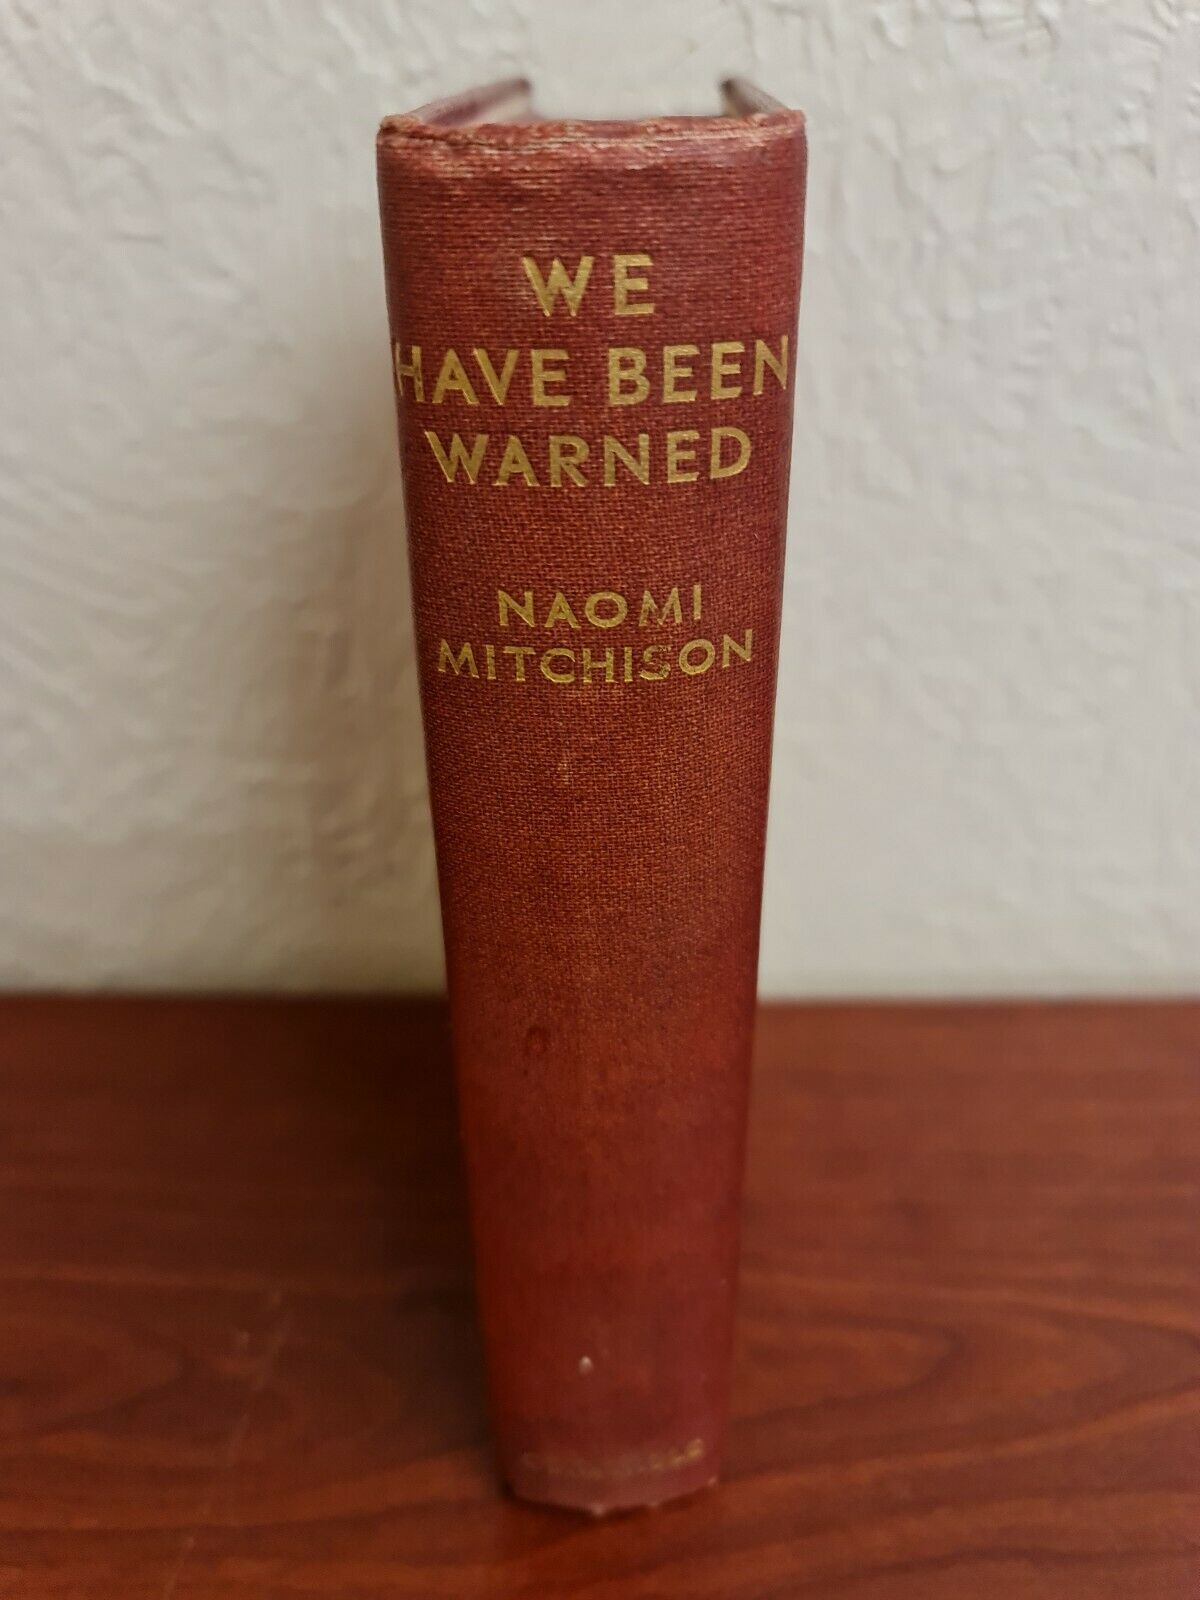 We Have Been Warned by Naomi Mitchison (1935)